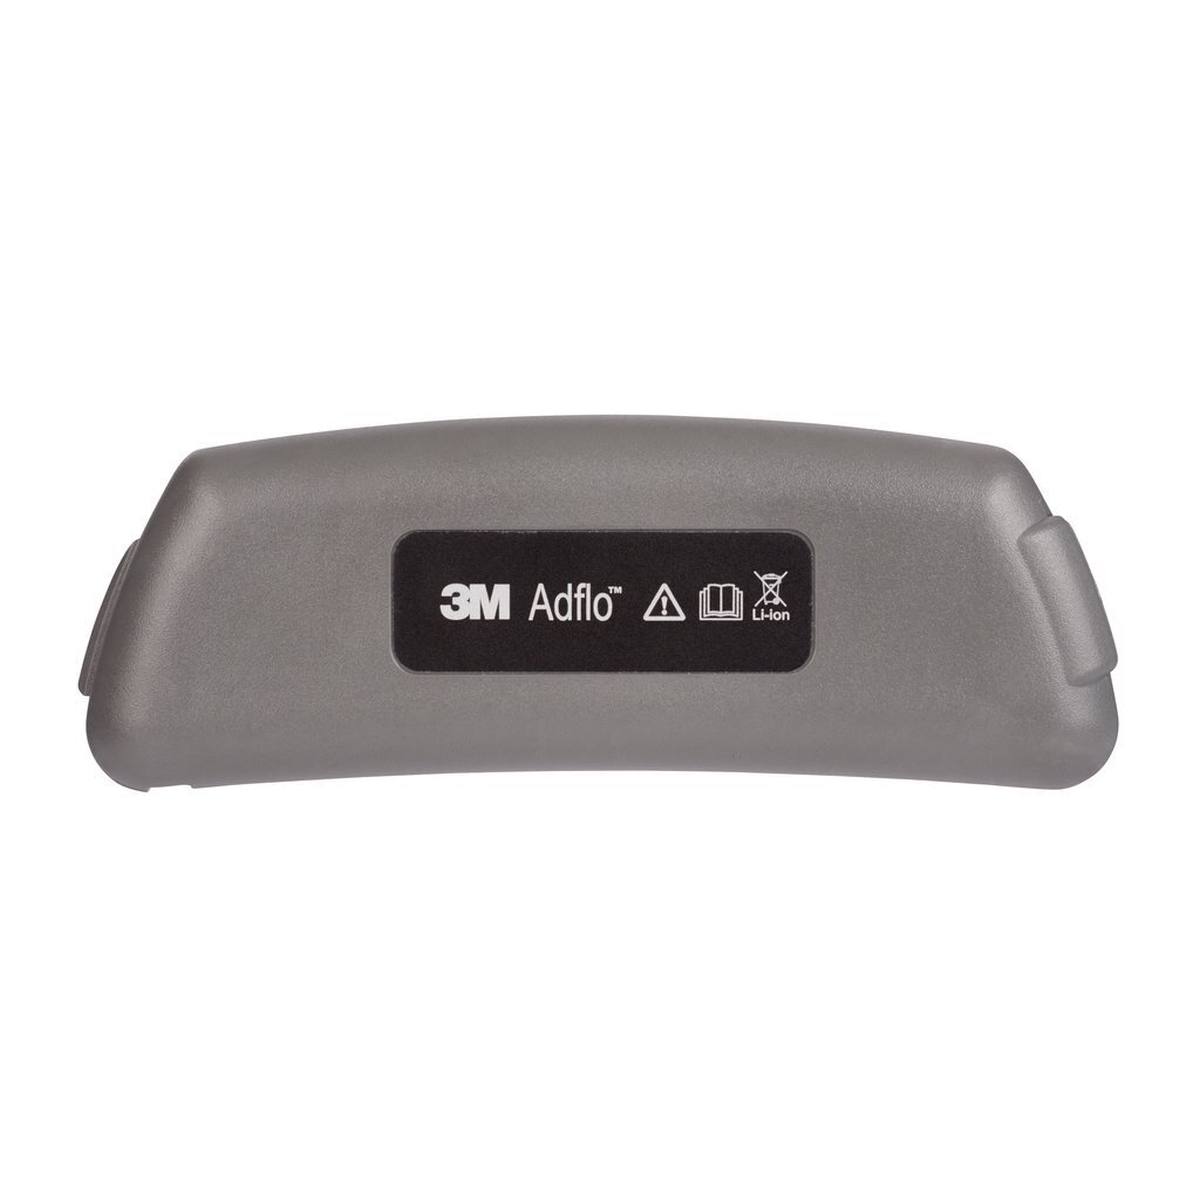 3M Adflo Li-Ion standard rechargeable battery, battery life up to 8 hours #837630